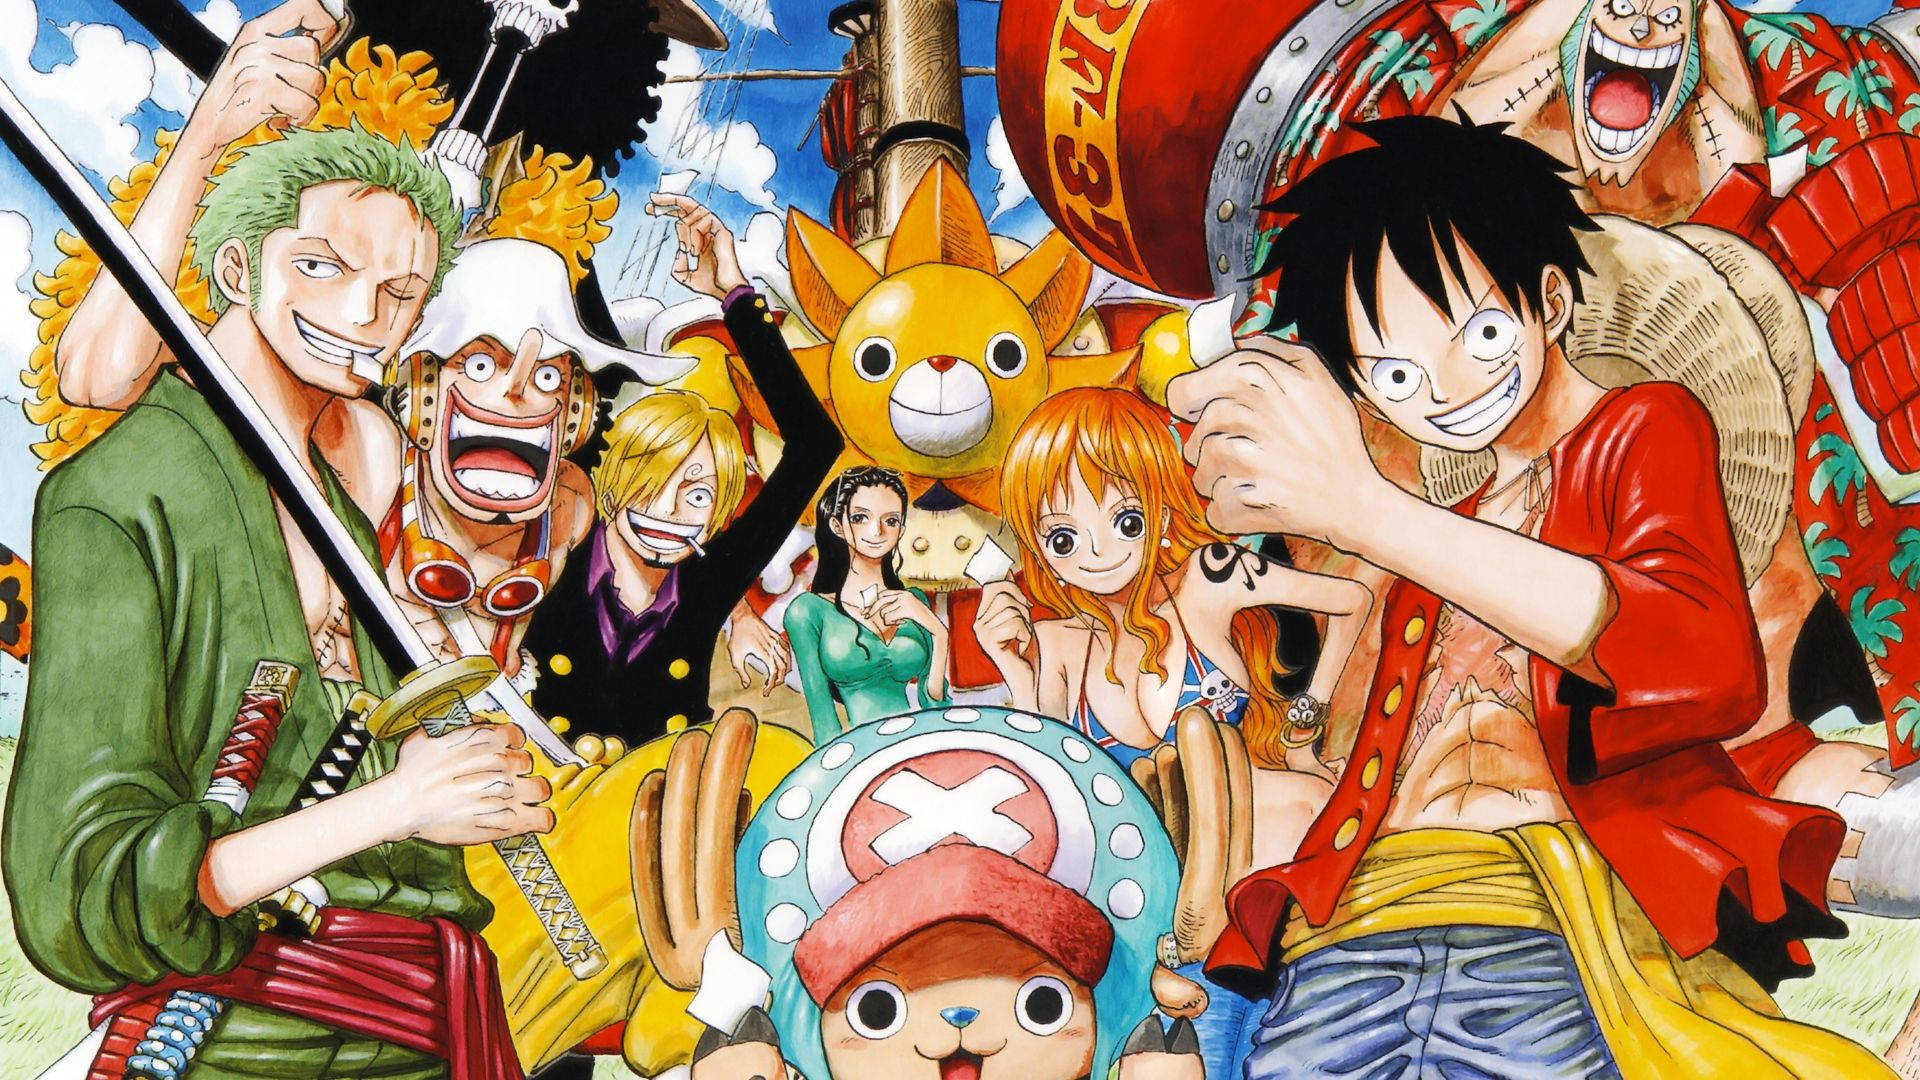 Free One Piece Wallpaper Downloads, [800+] One Piece Wallpapers for FREE |  